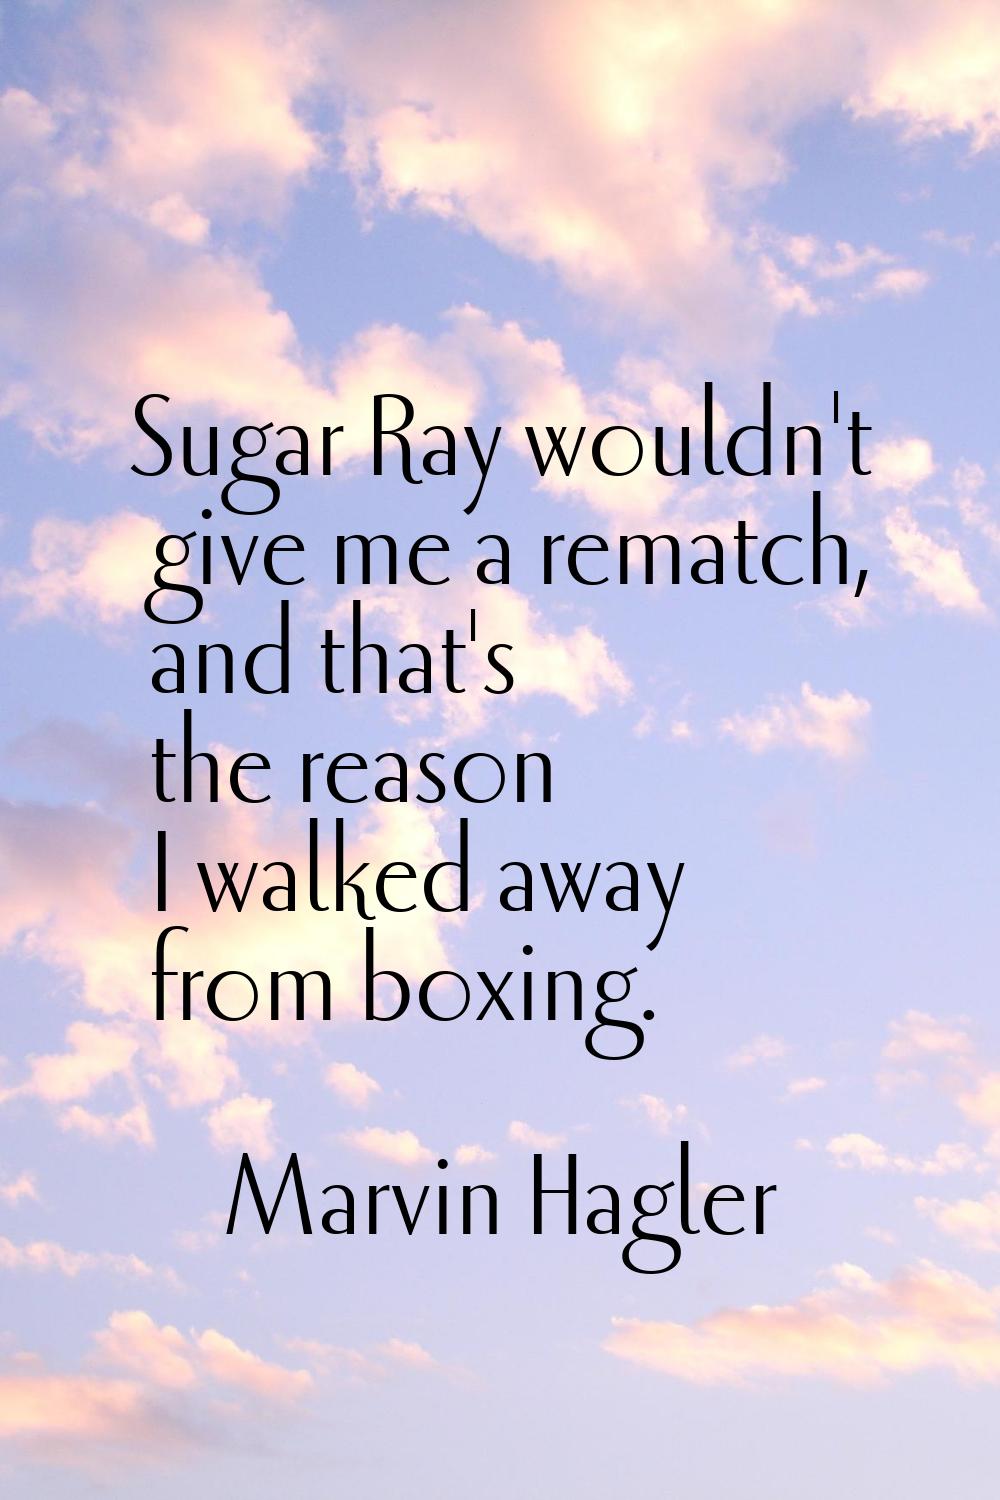 Sugar Ray wouldn't give me a rematch, and that's the reason I walked away from boxing.